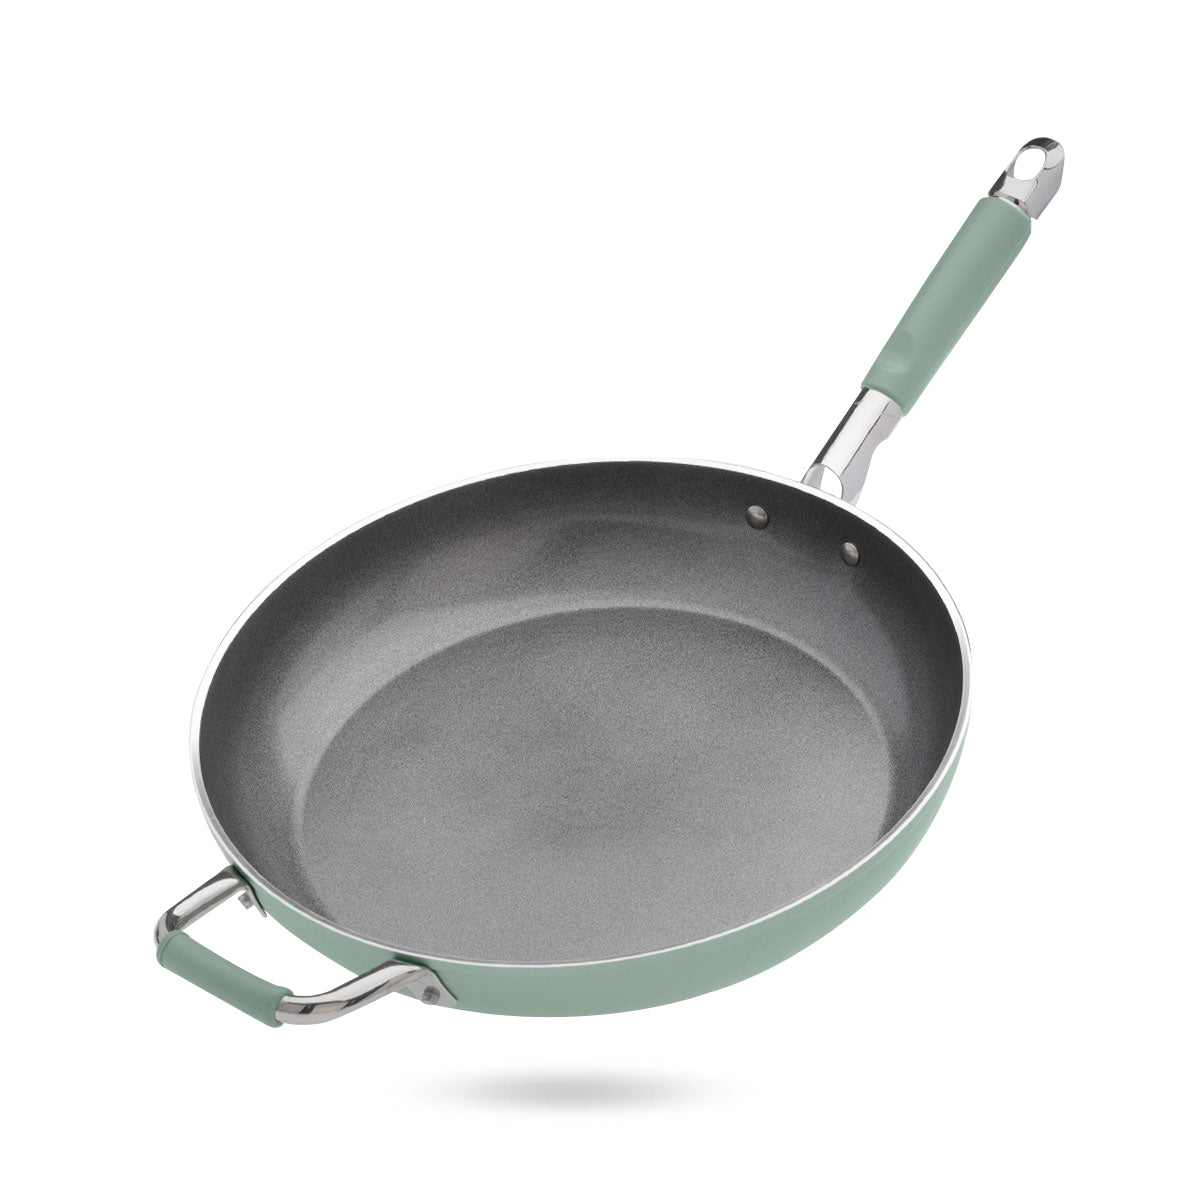 Best Nonstick Cookware 2022: Types, Safety, Use, and Care